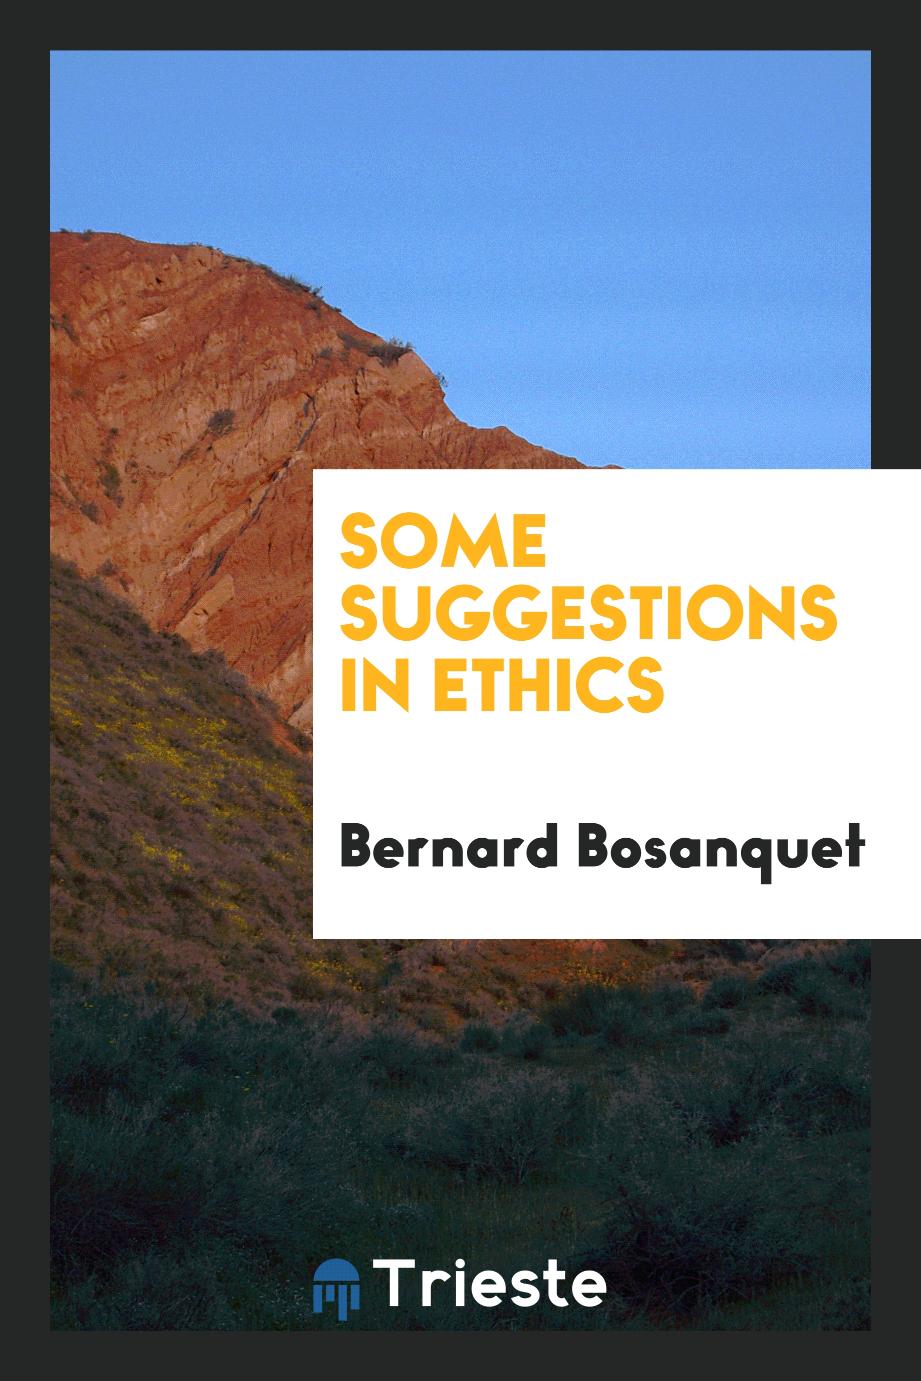 Some suggestions in ethics